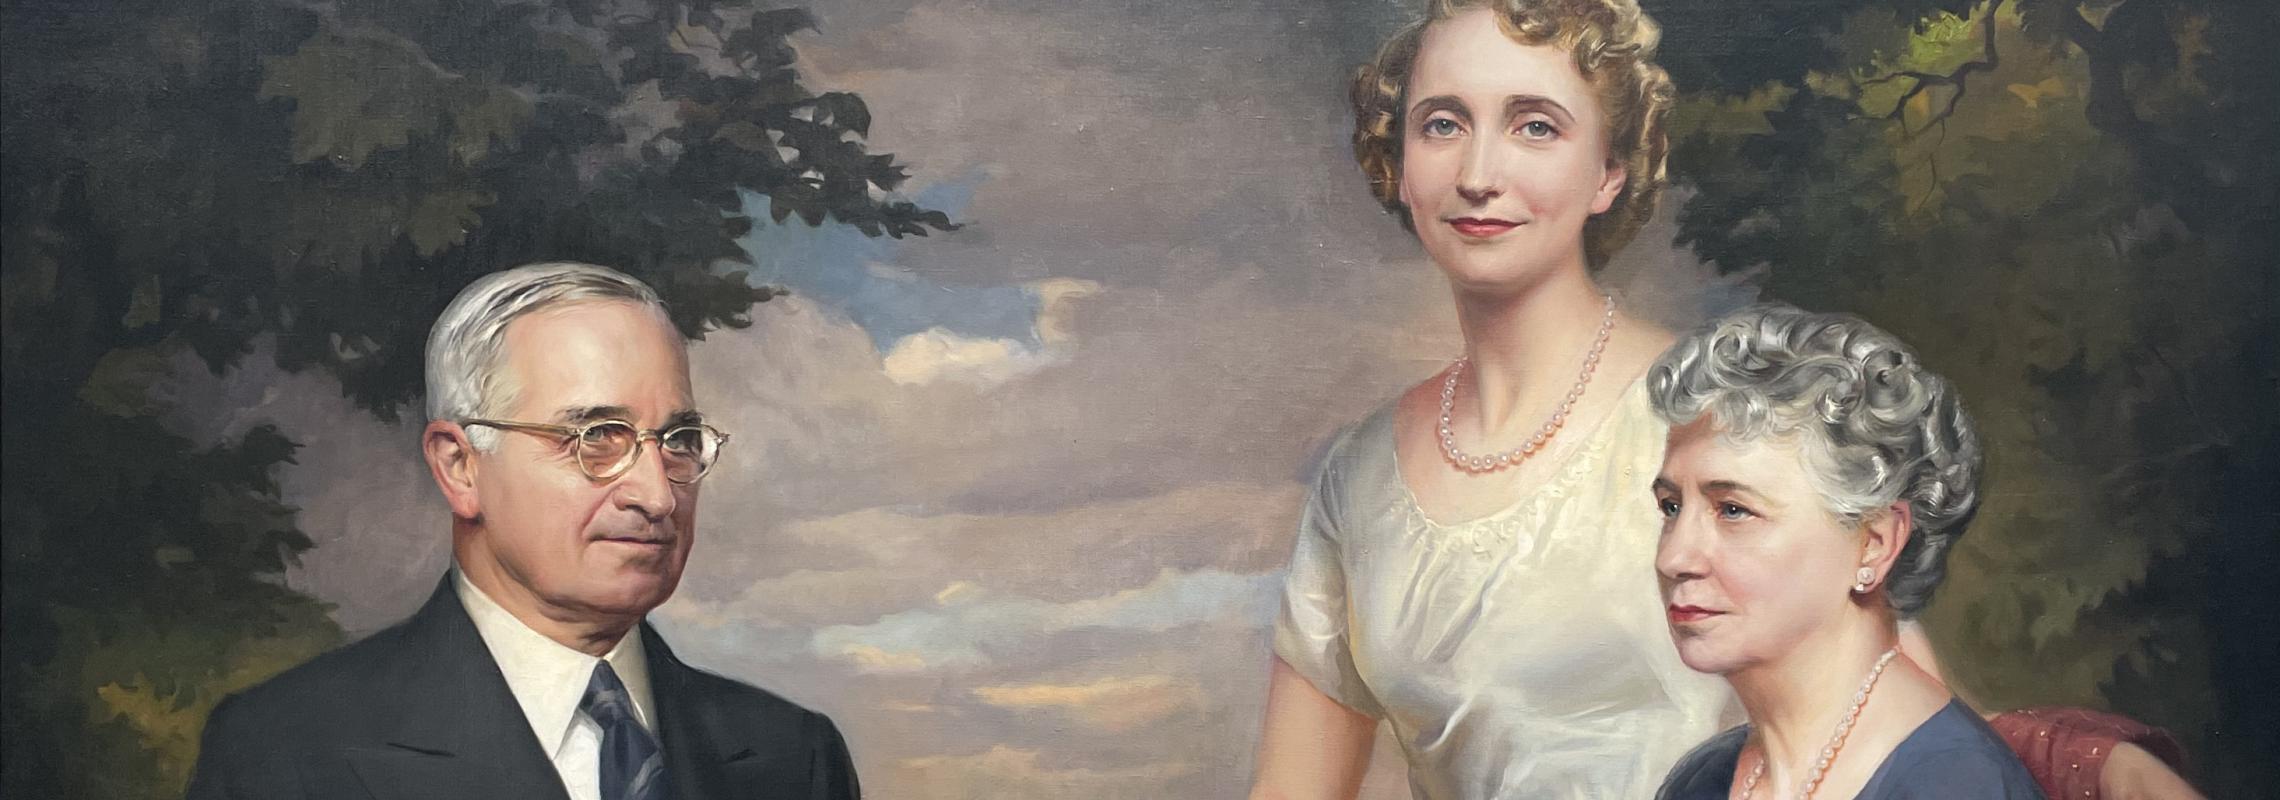 Formal portrait painting of Harry Truman, his wife Bess, and daughter Mary Margaret